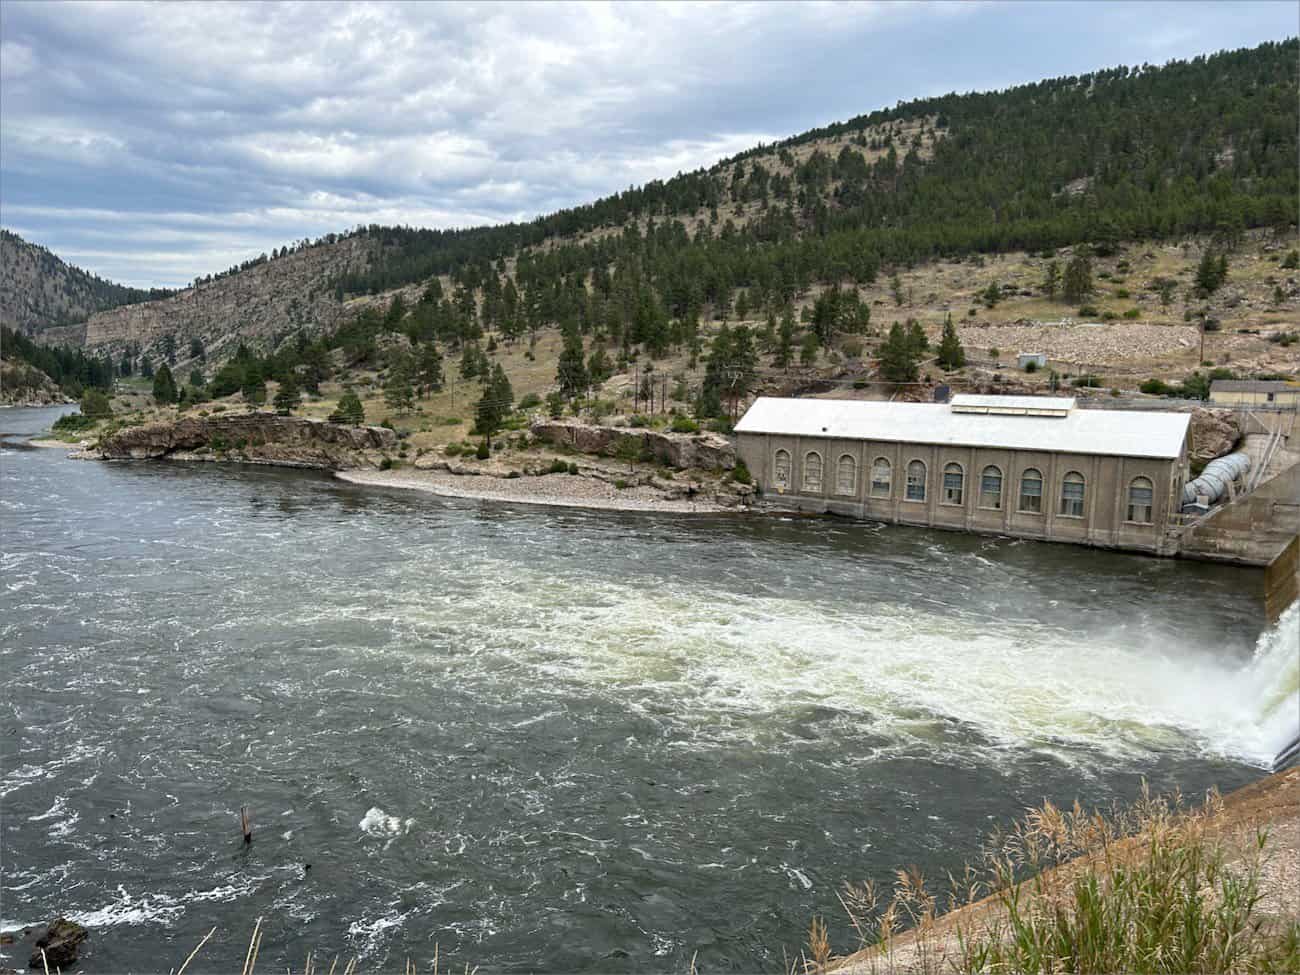 Hauser Dam - A hydroelectric power station on a river with rapidly flowing water in a mountainous landscape at Black Sandy State Park.